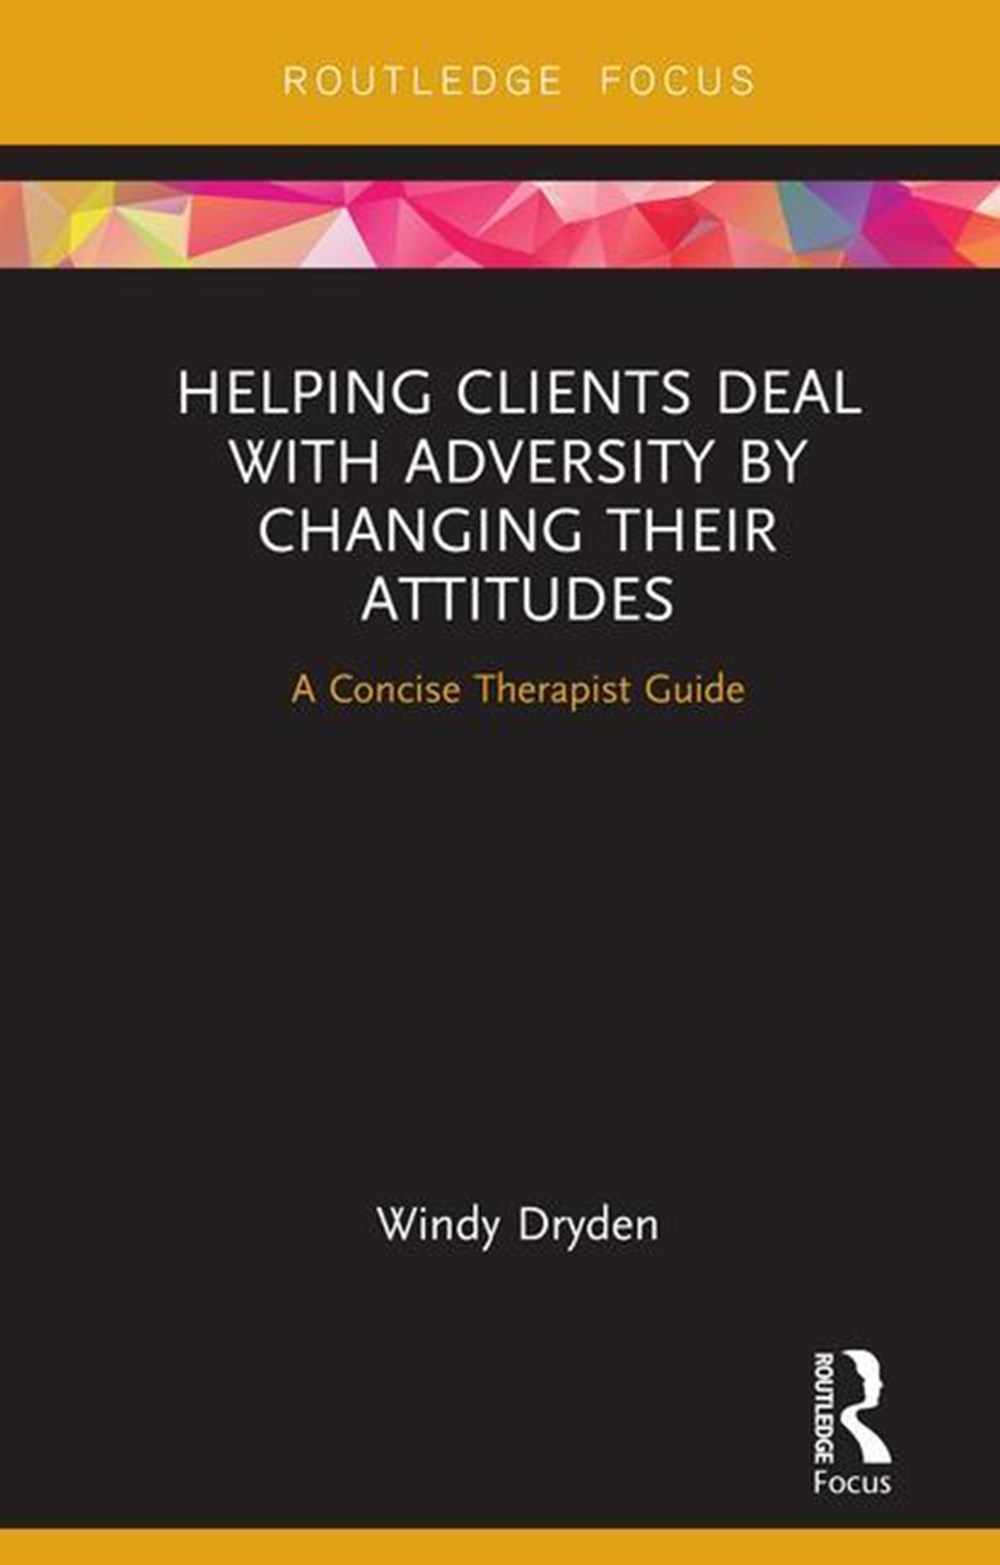 Helping Clients Deal with Adversity by Changing Their Attitudes: A Concise Therapist Guide